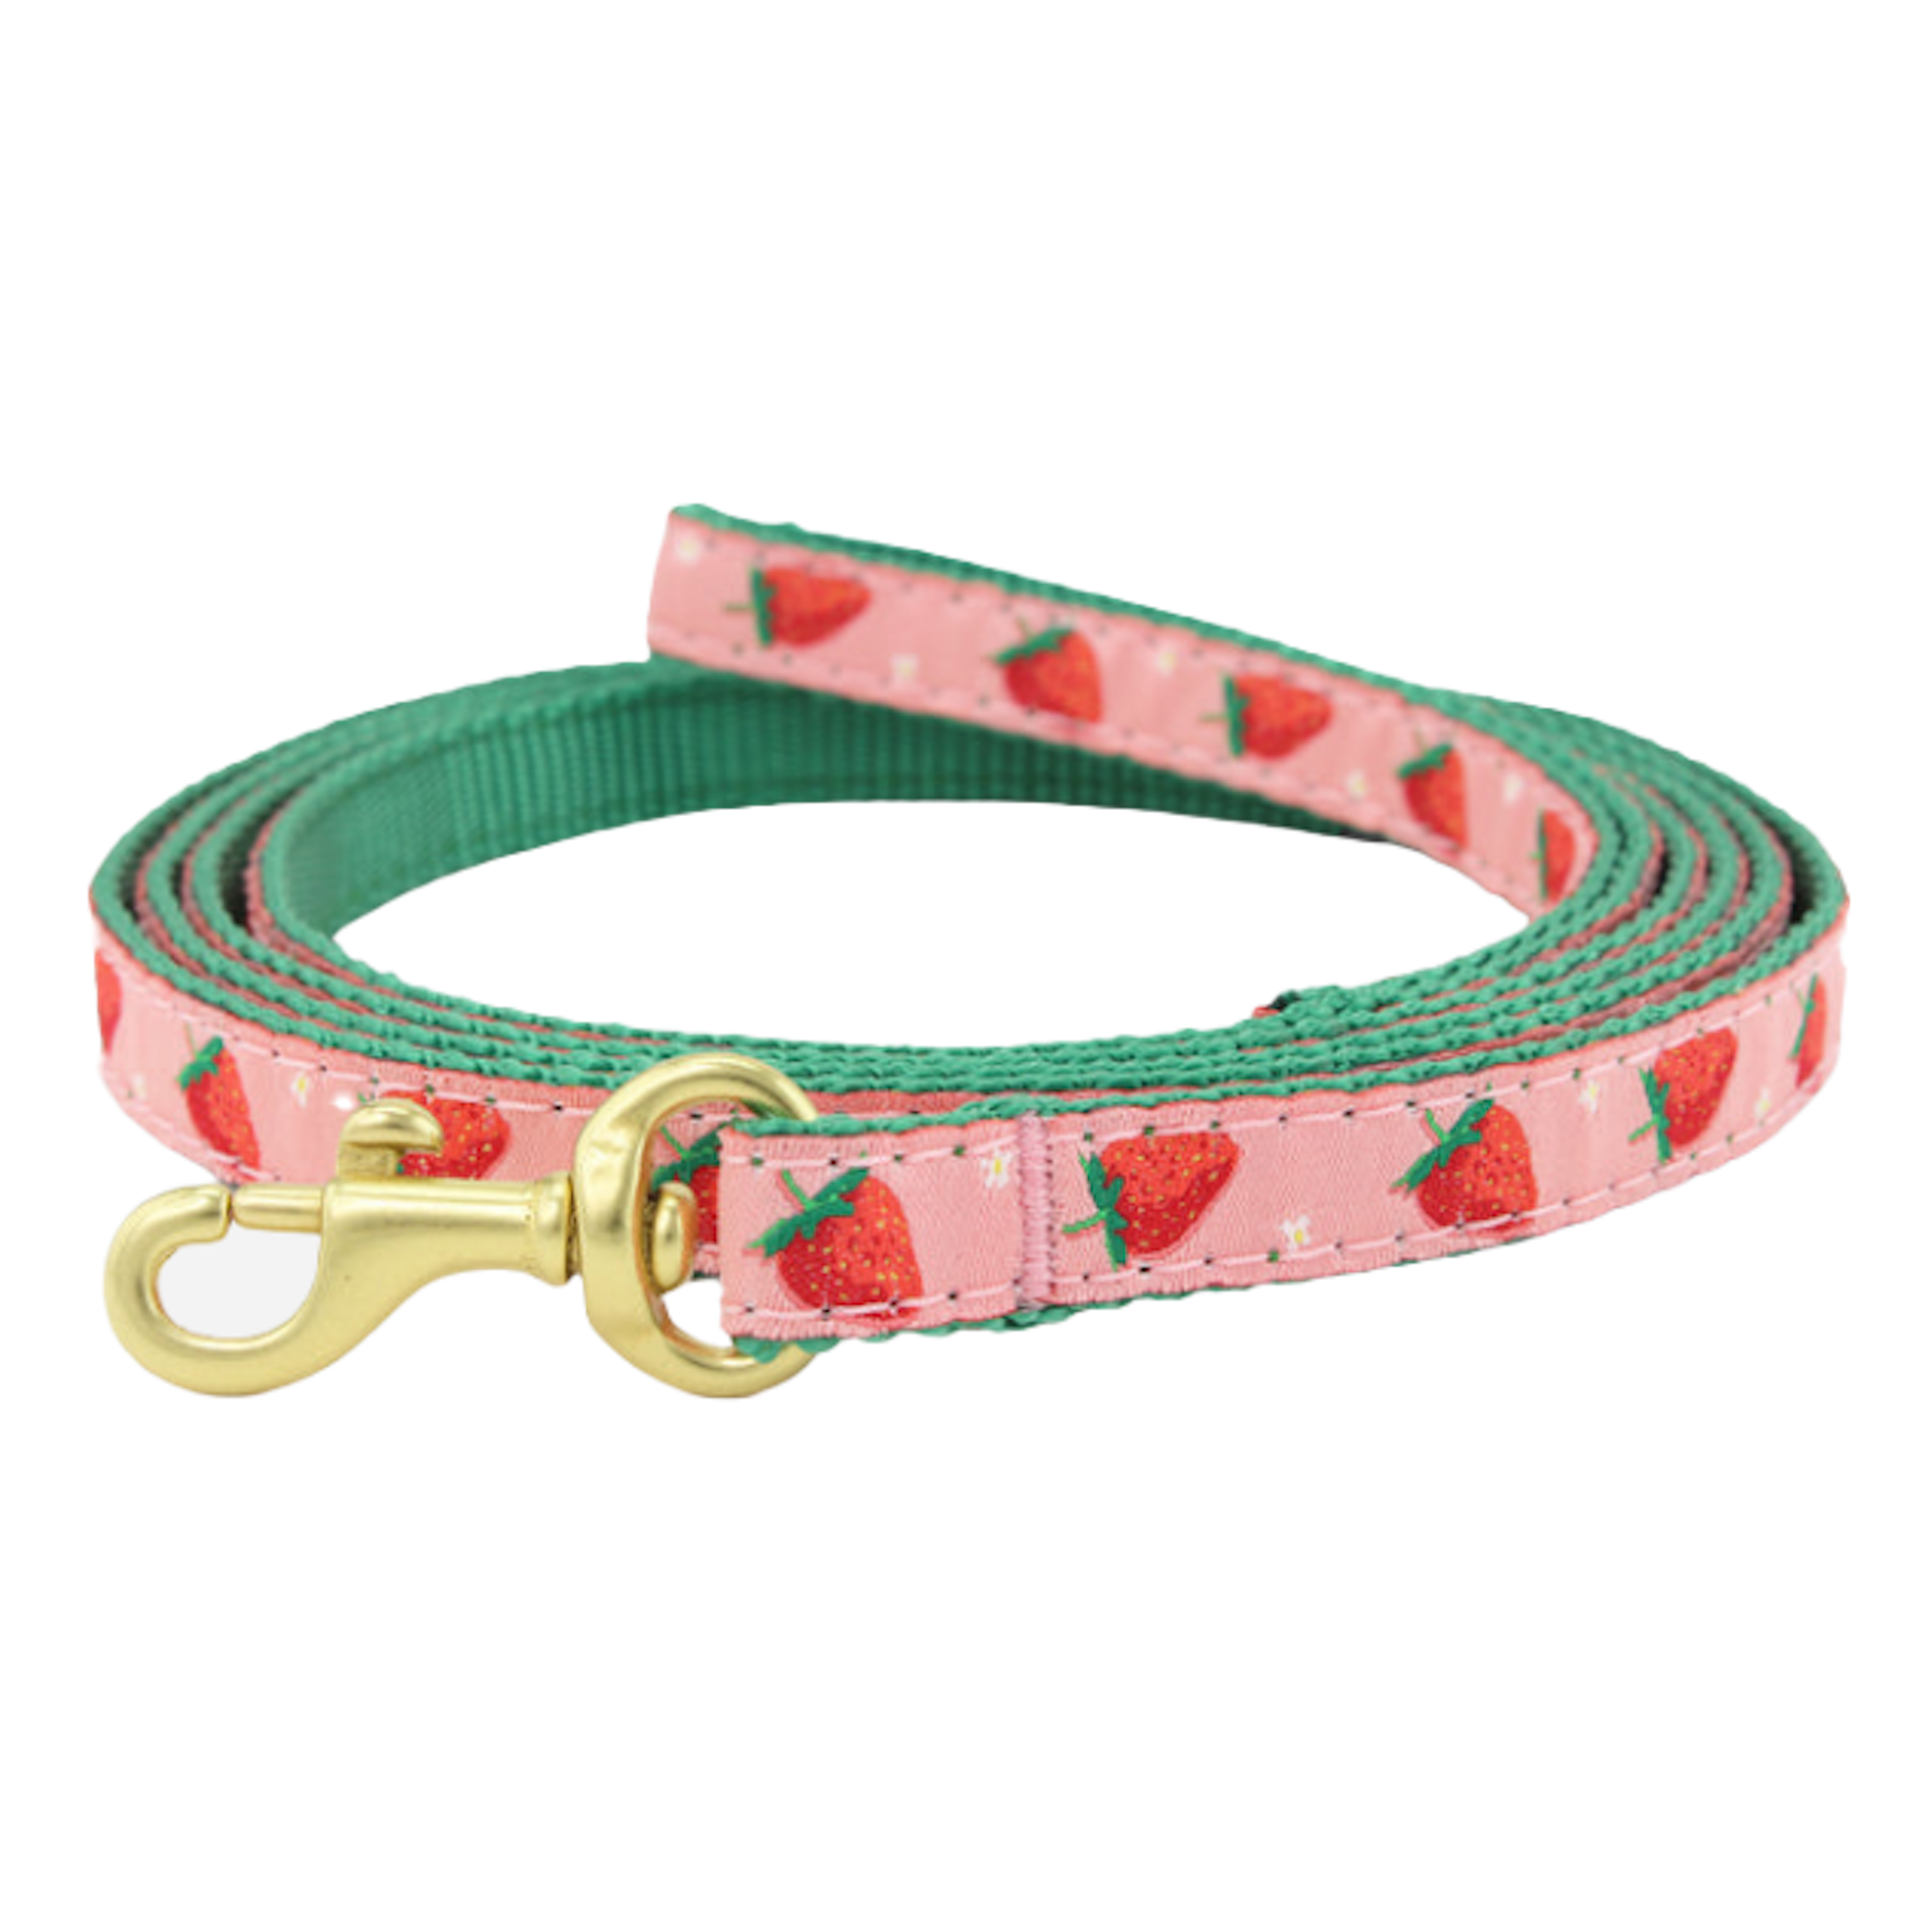 STRAWBERRY-FIELDS-DOG-LEASH-SMALL-BREED-TEACUP